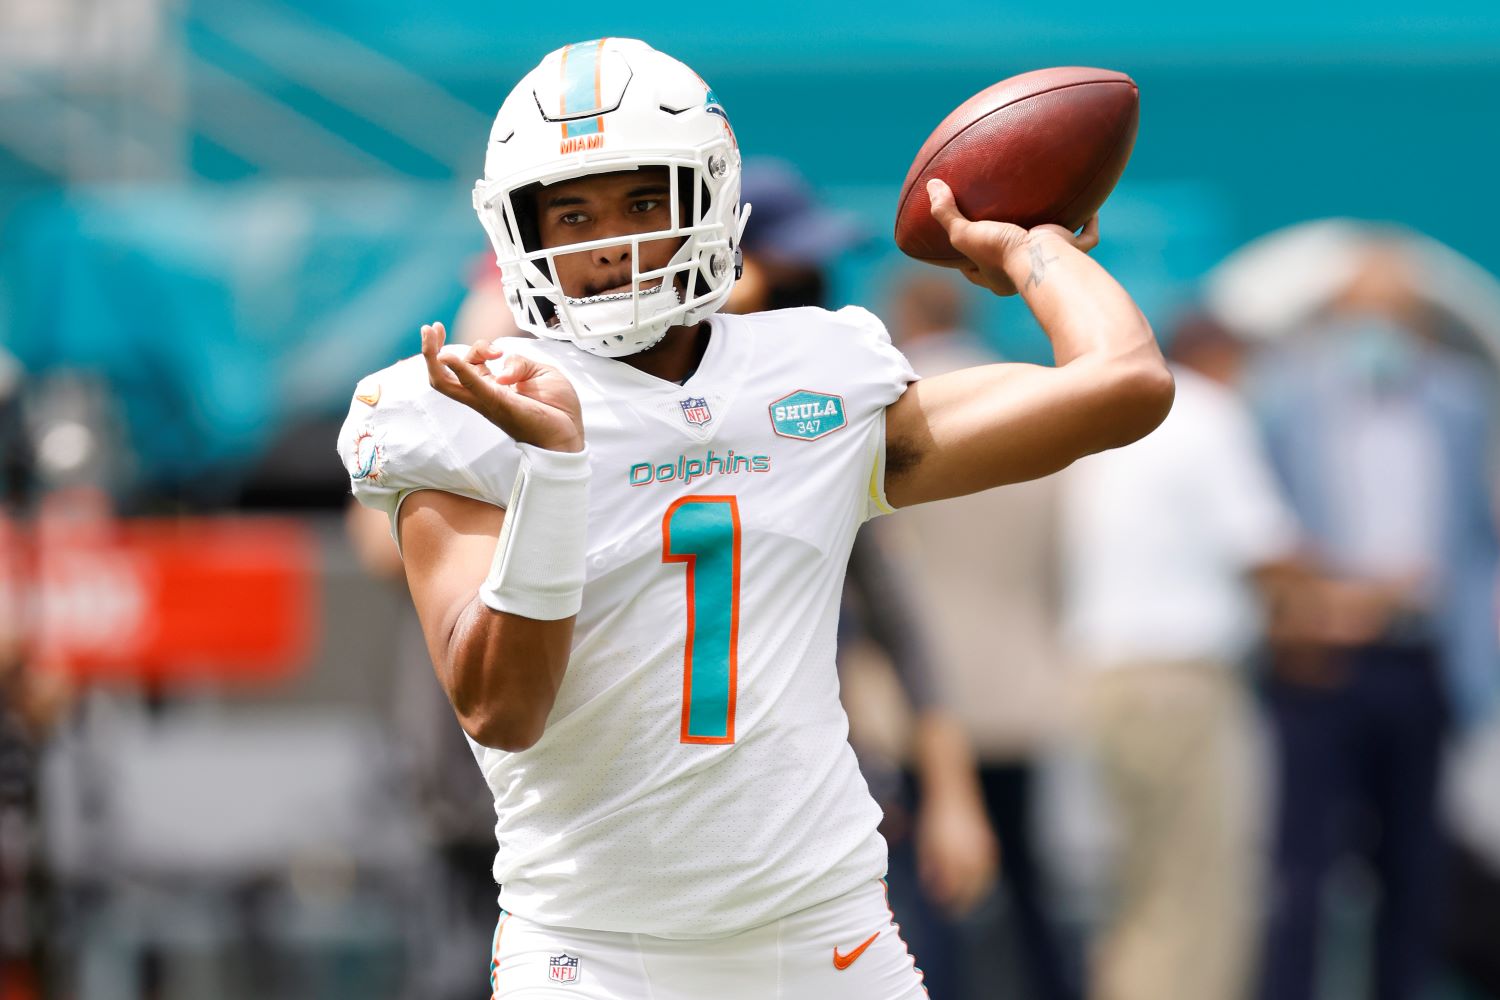 Tua Tagovailoa just changed the fate of the 2020 NFL season now that the Dolphins have named him as their new starting quarterback.